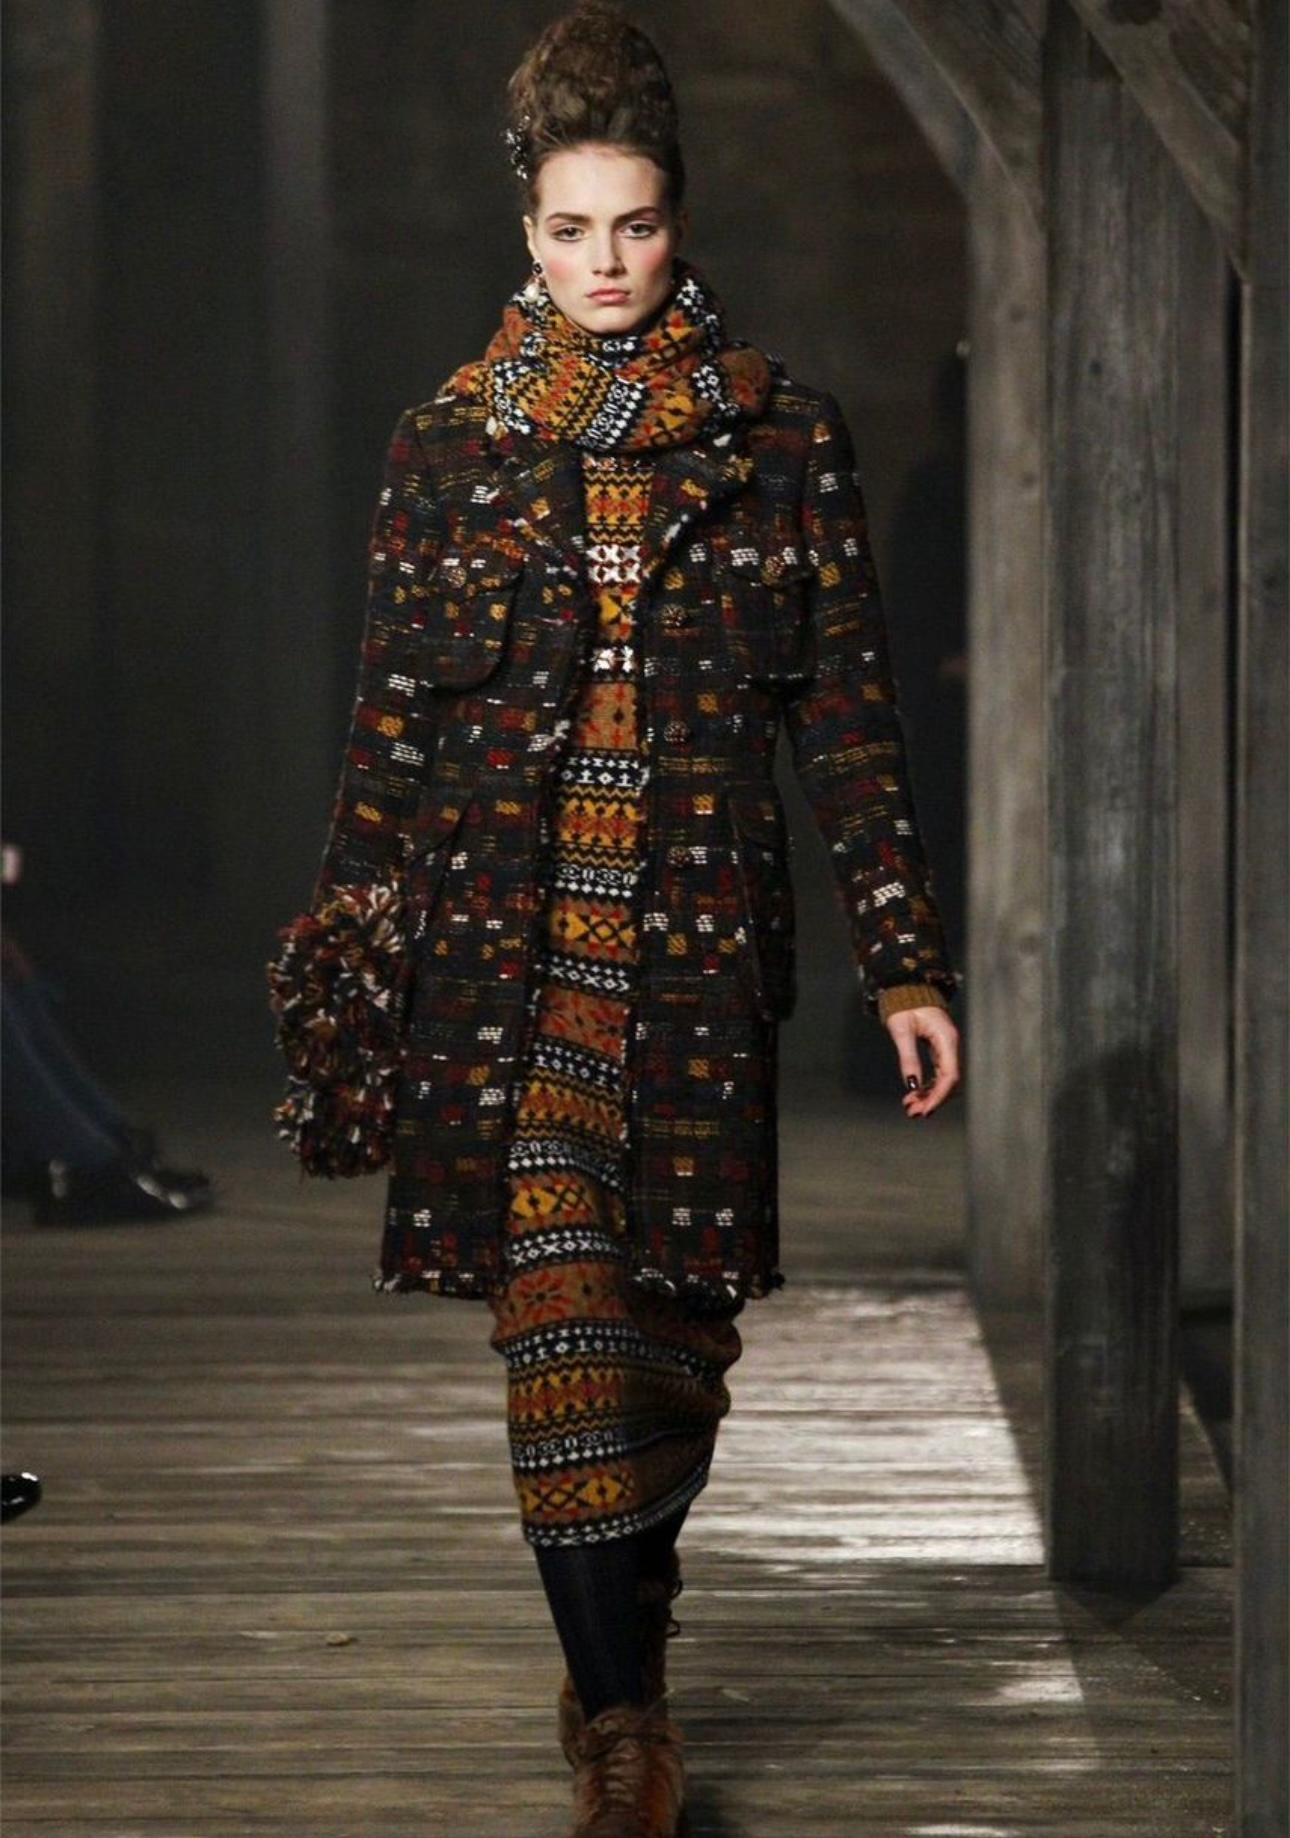 New stunning Chanel 100% Cashmere set (dress and 2,7 meters scarf) with CC Logo pattern - from Runway of Paris / EDINBURGH Collection, 2013 Metiers d'Art, 13A
Boutique price for only 1 scarf was over 2,700$ (!)
- made of pure cashmere this maxi